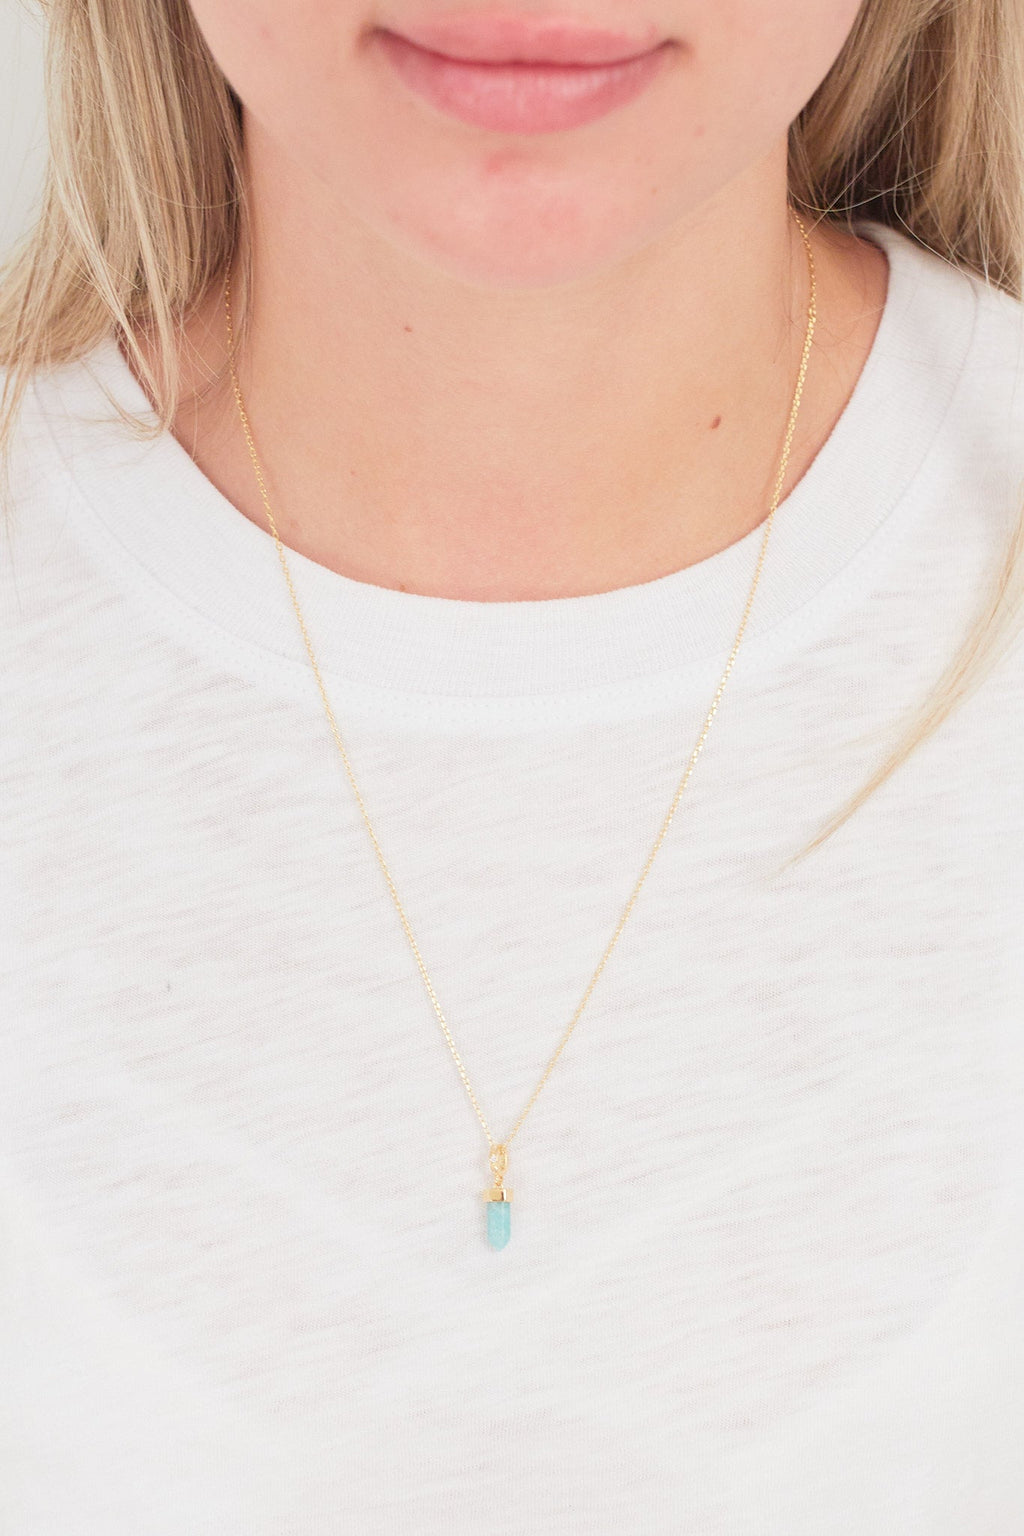 Intention Of Truth Amazonite Necklace - Driftwood Maui & Home By Driftwood